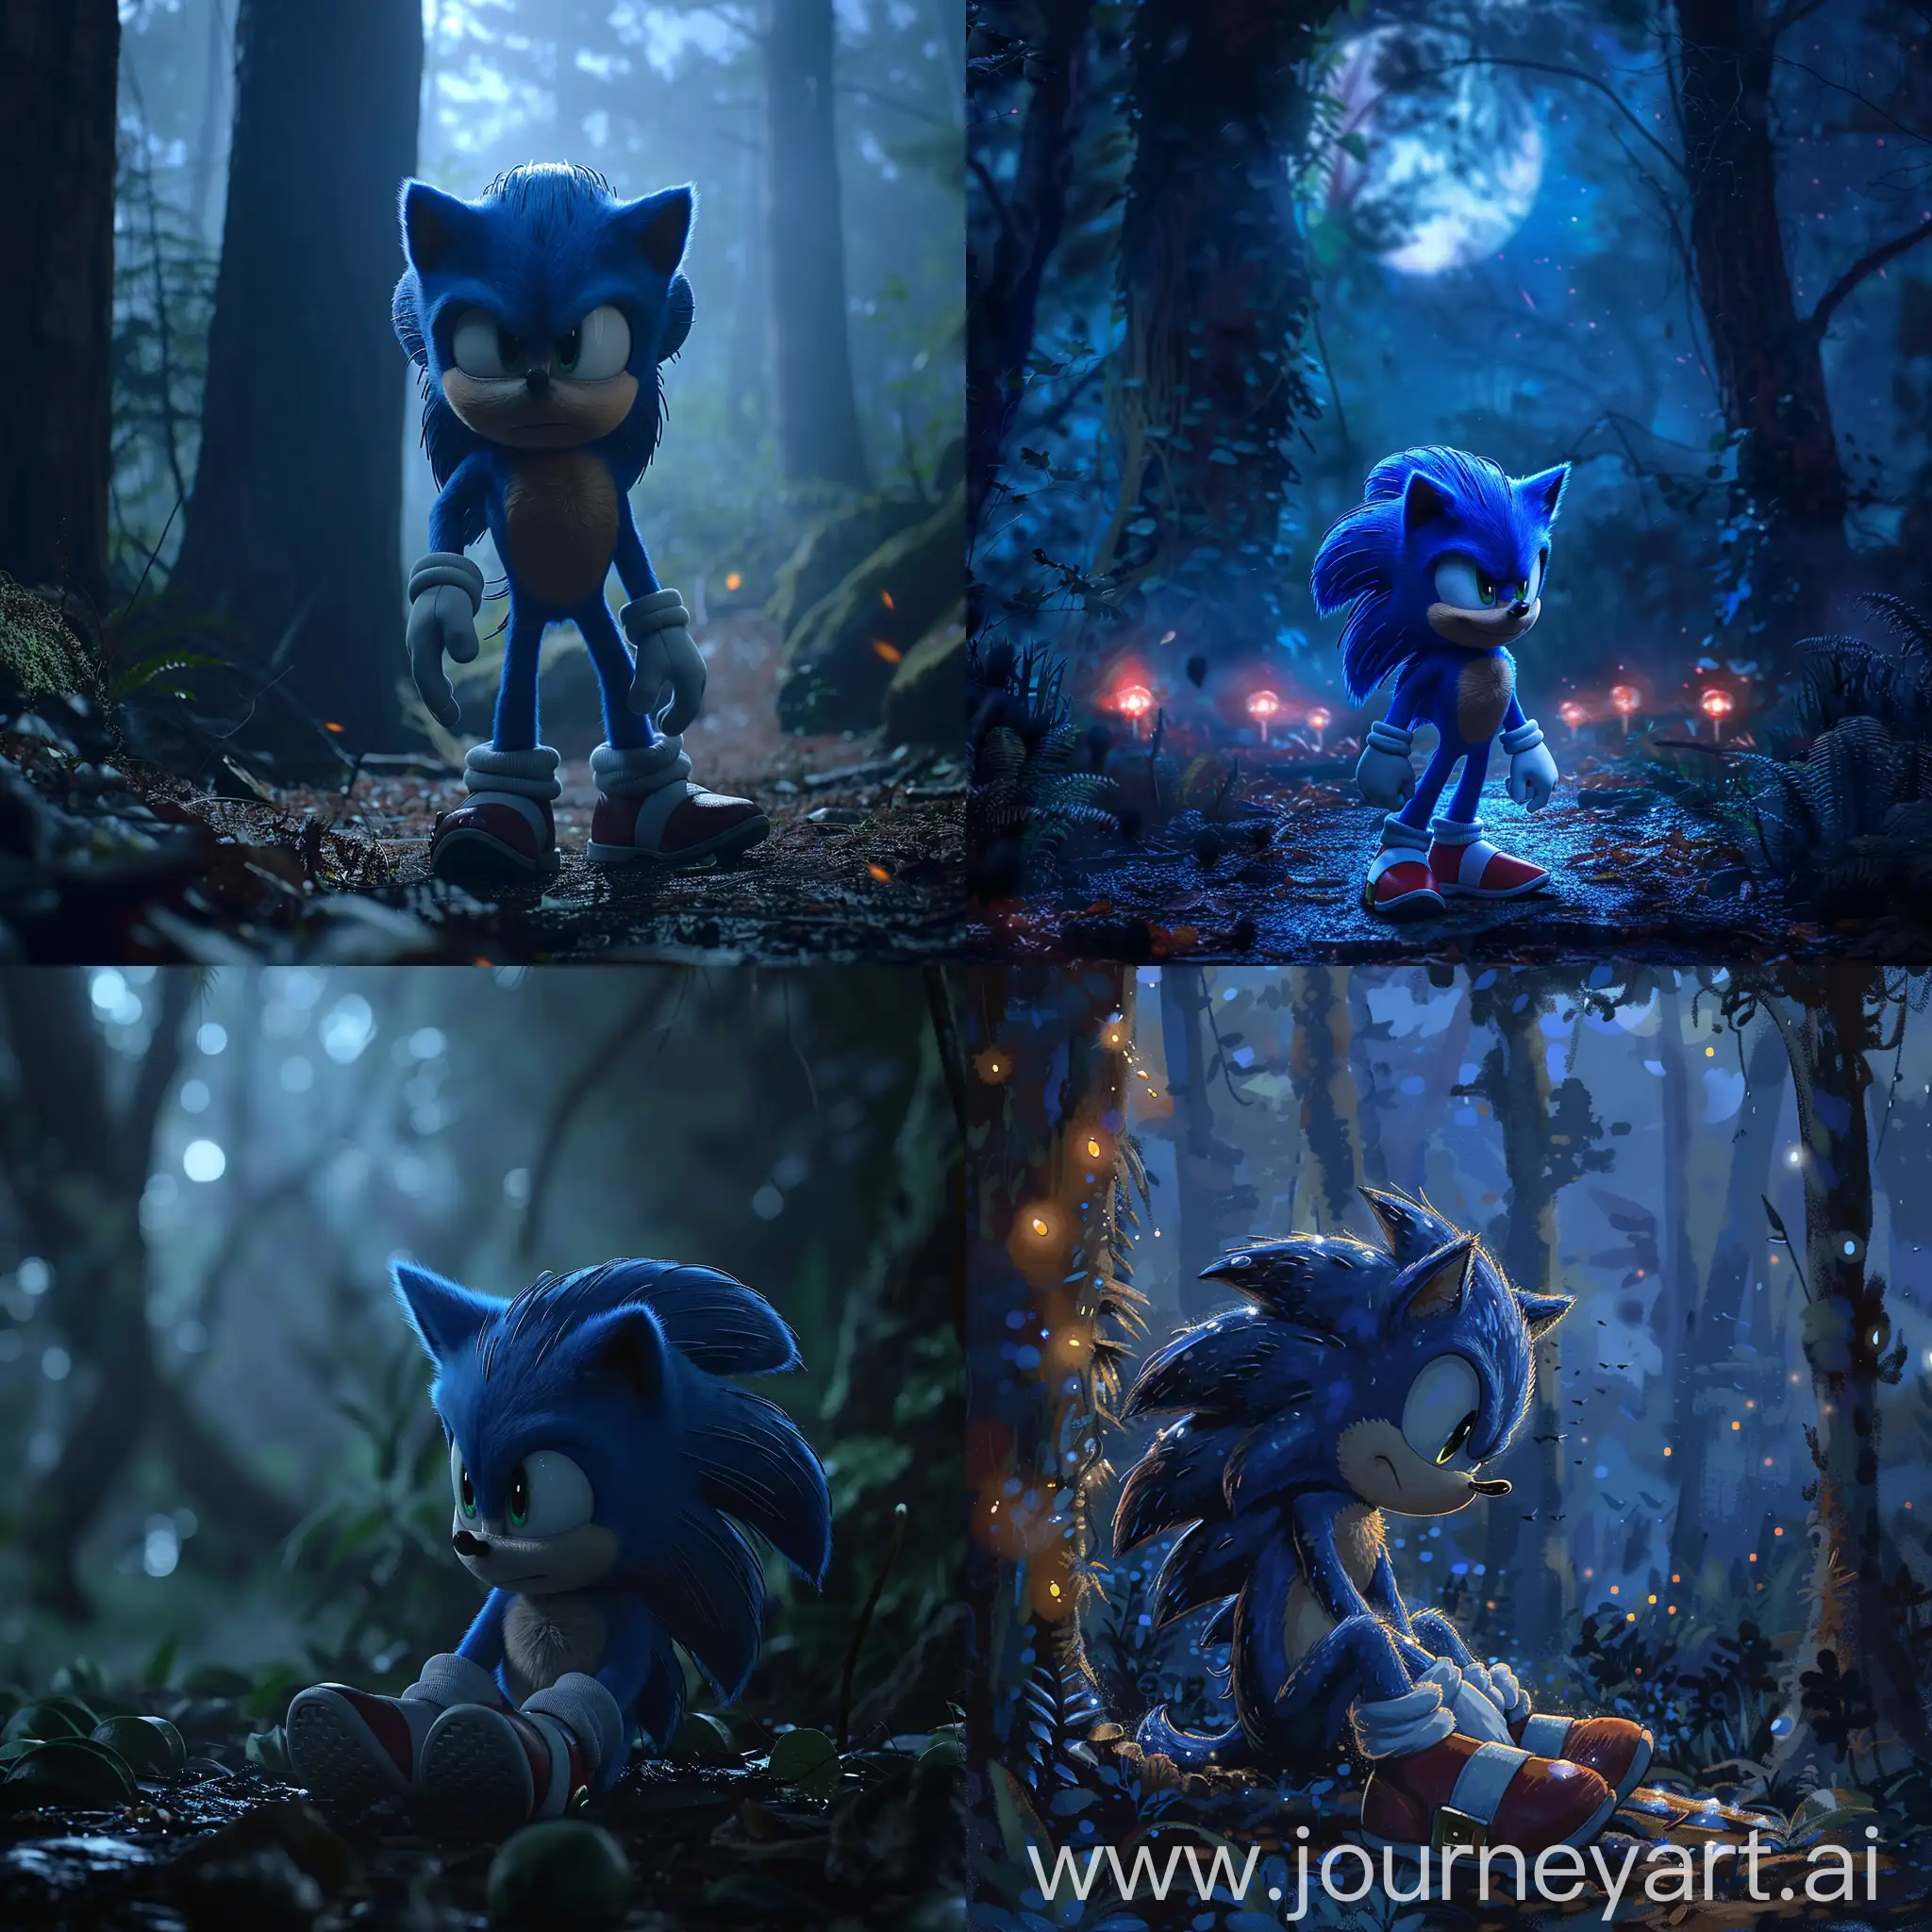 Sad-Sonic-the-Hedgehog-Movie-Scene-in-Forest-at-Night